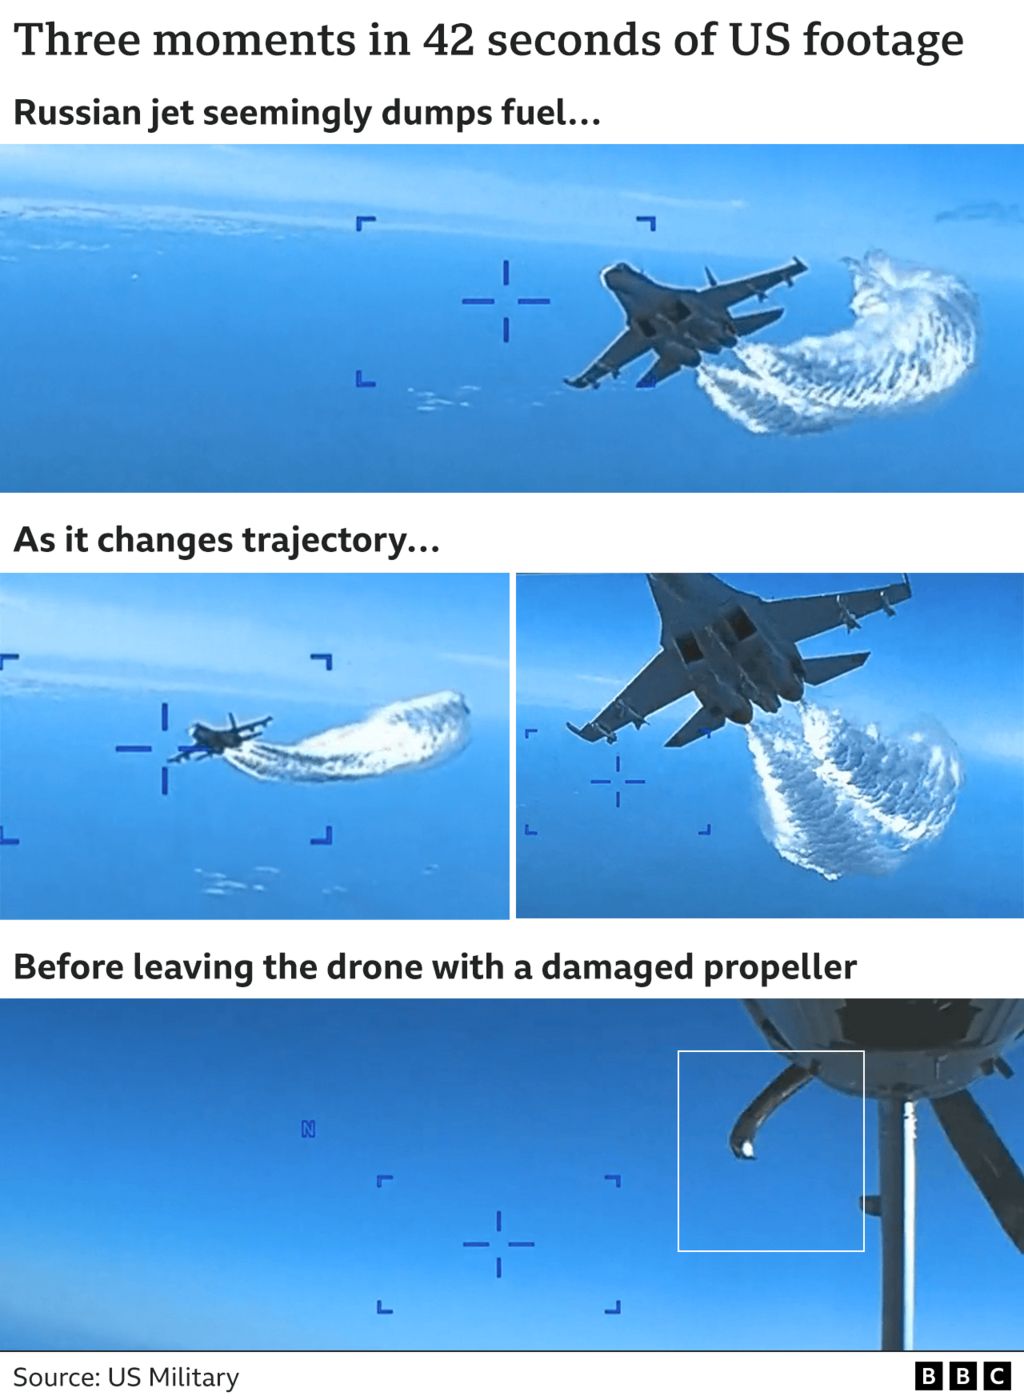 Graphic showing key stills from video